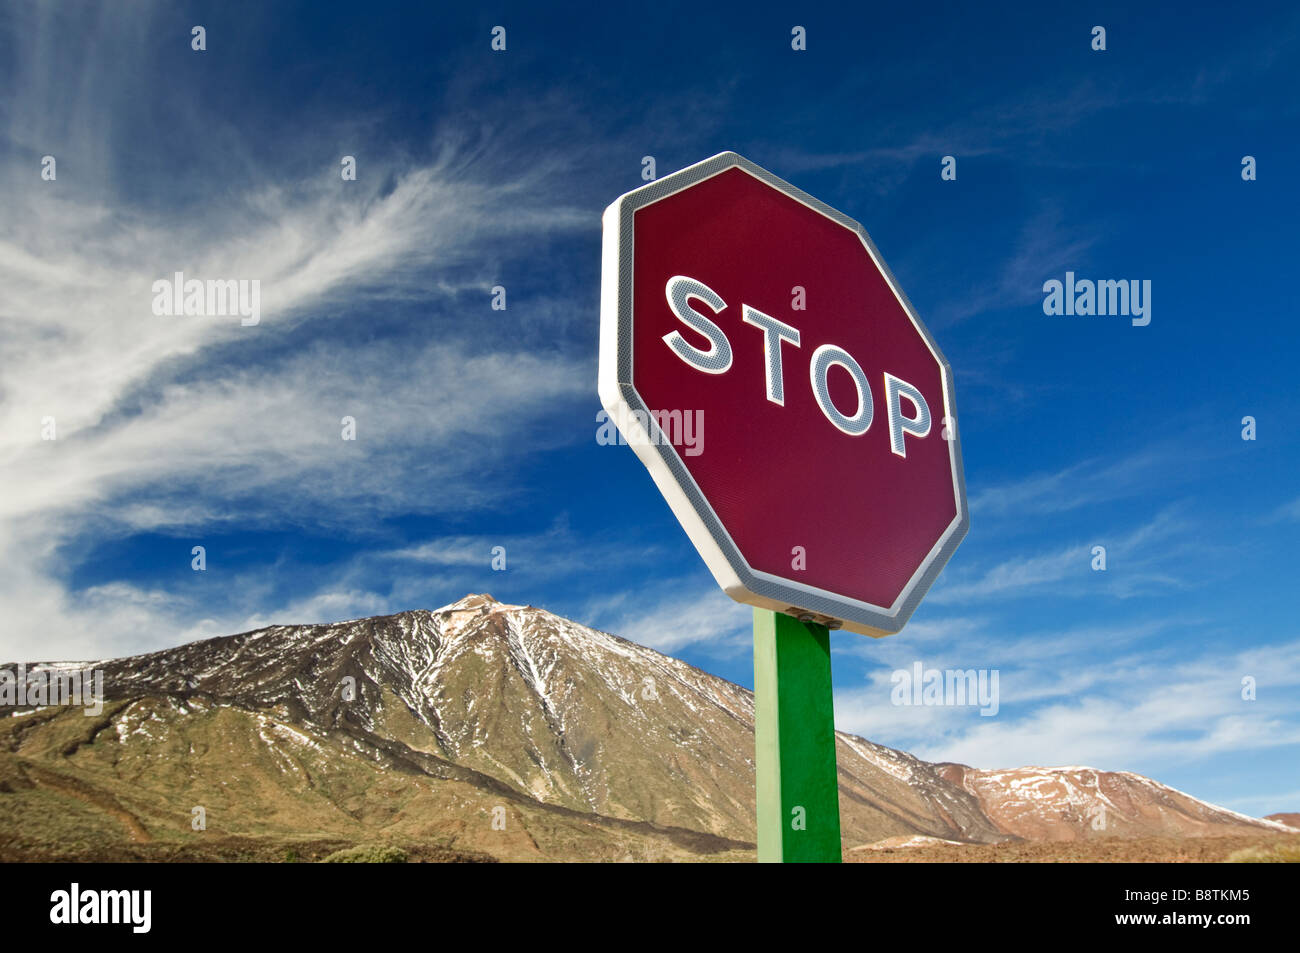 'STOP' road sign with mountain behind representing a symbolic warning for environmental issues such as global climate change Stock Photo